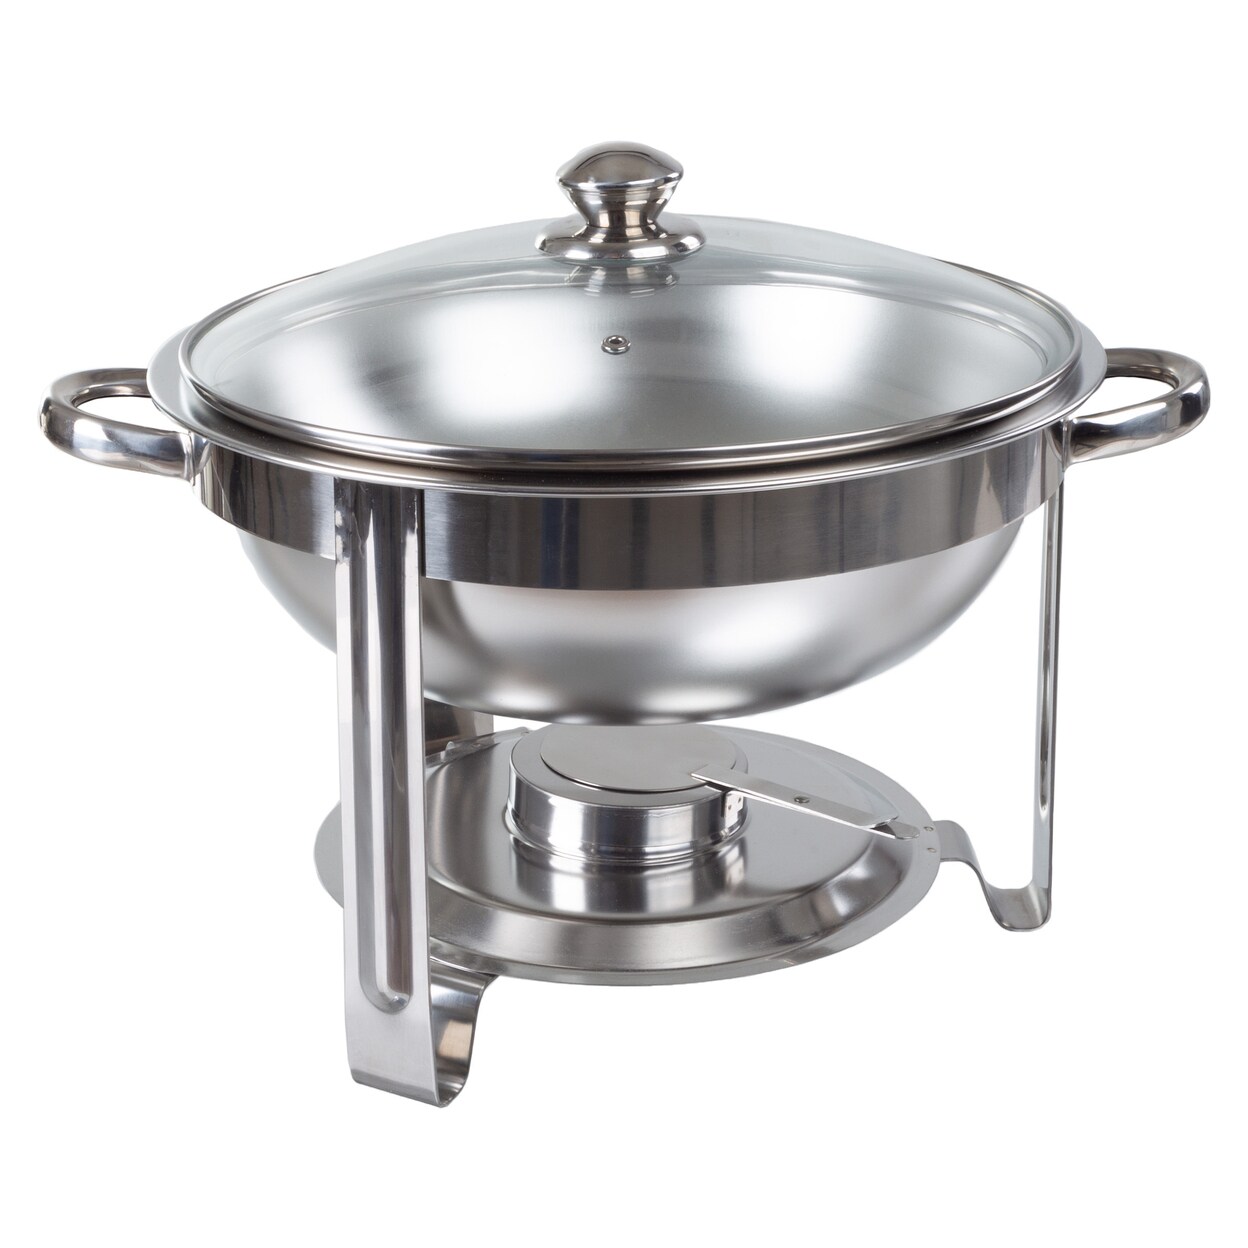 Classic Cuisine Round 5 QT Chafing Dish Buffet Set Food Warmers for Parties Stainless Steel